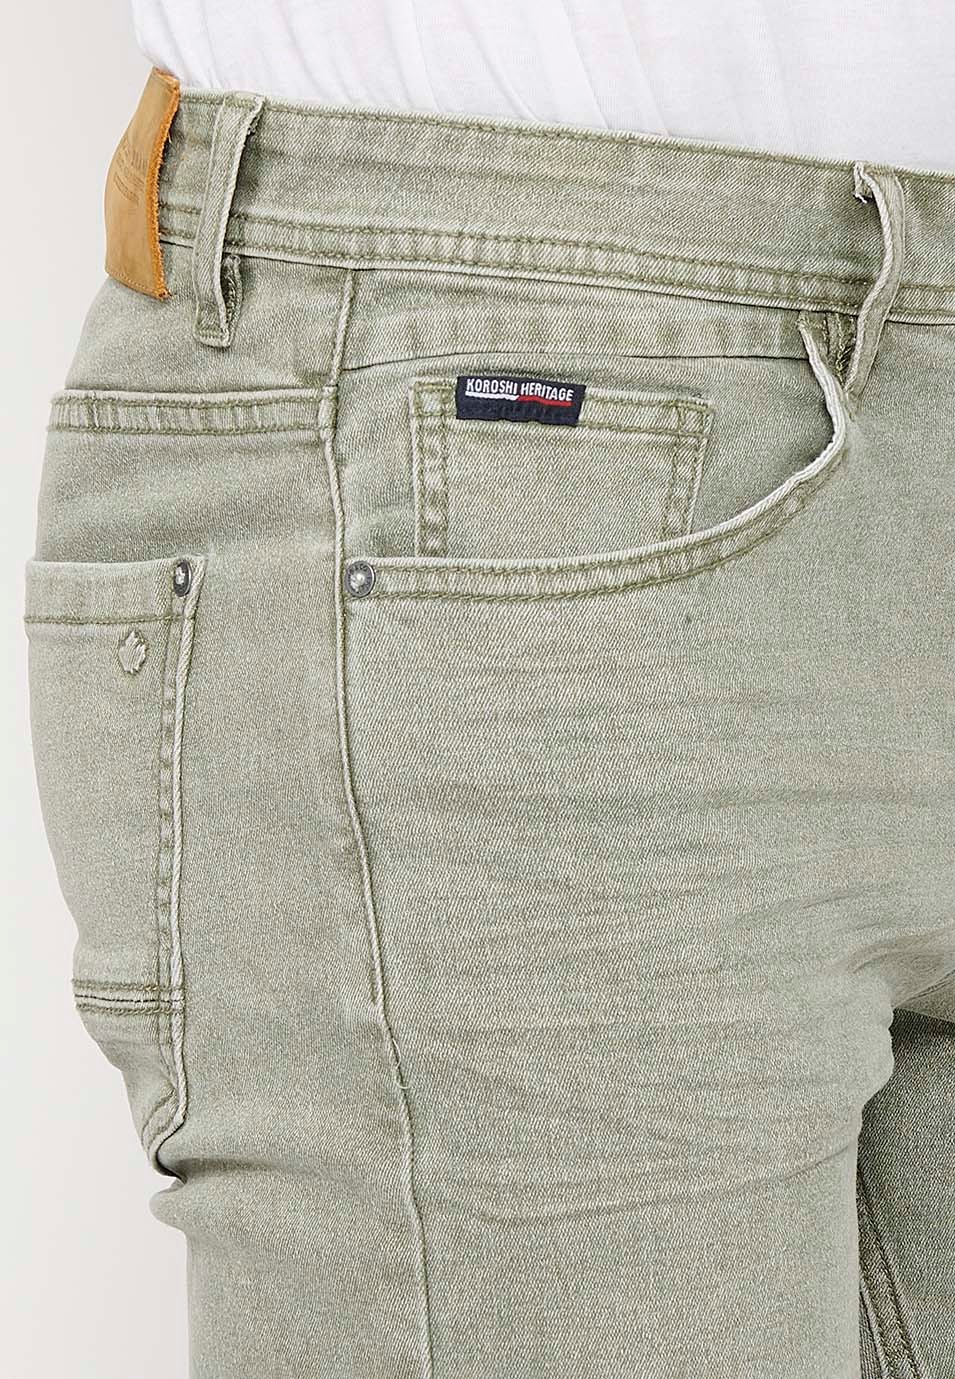 Shorts with a turn-up finish with front zipper and button closure and five pockets, one with a match pocket, in Green for Men 8